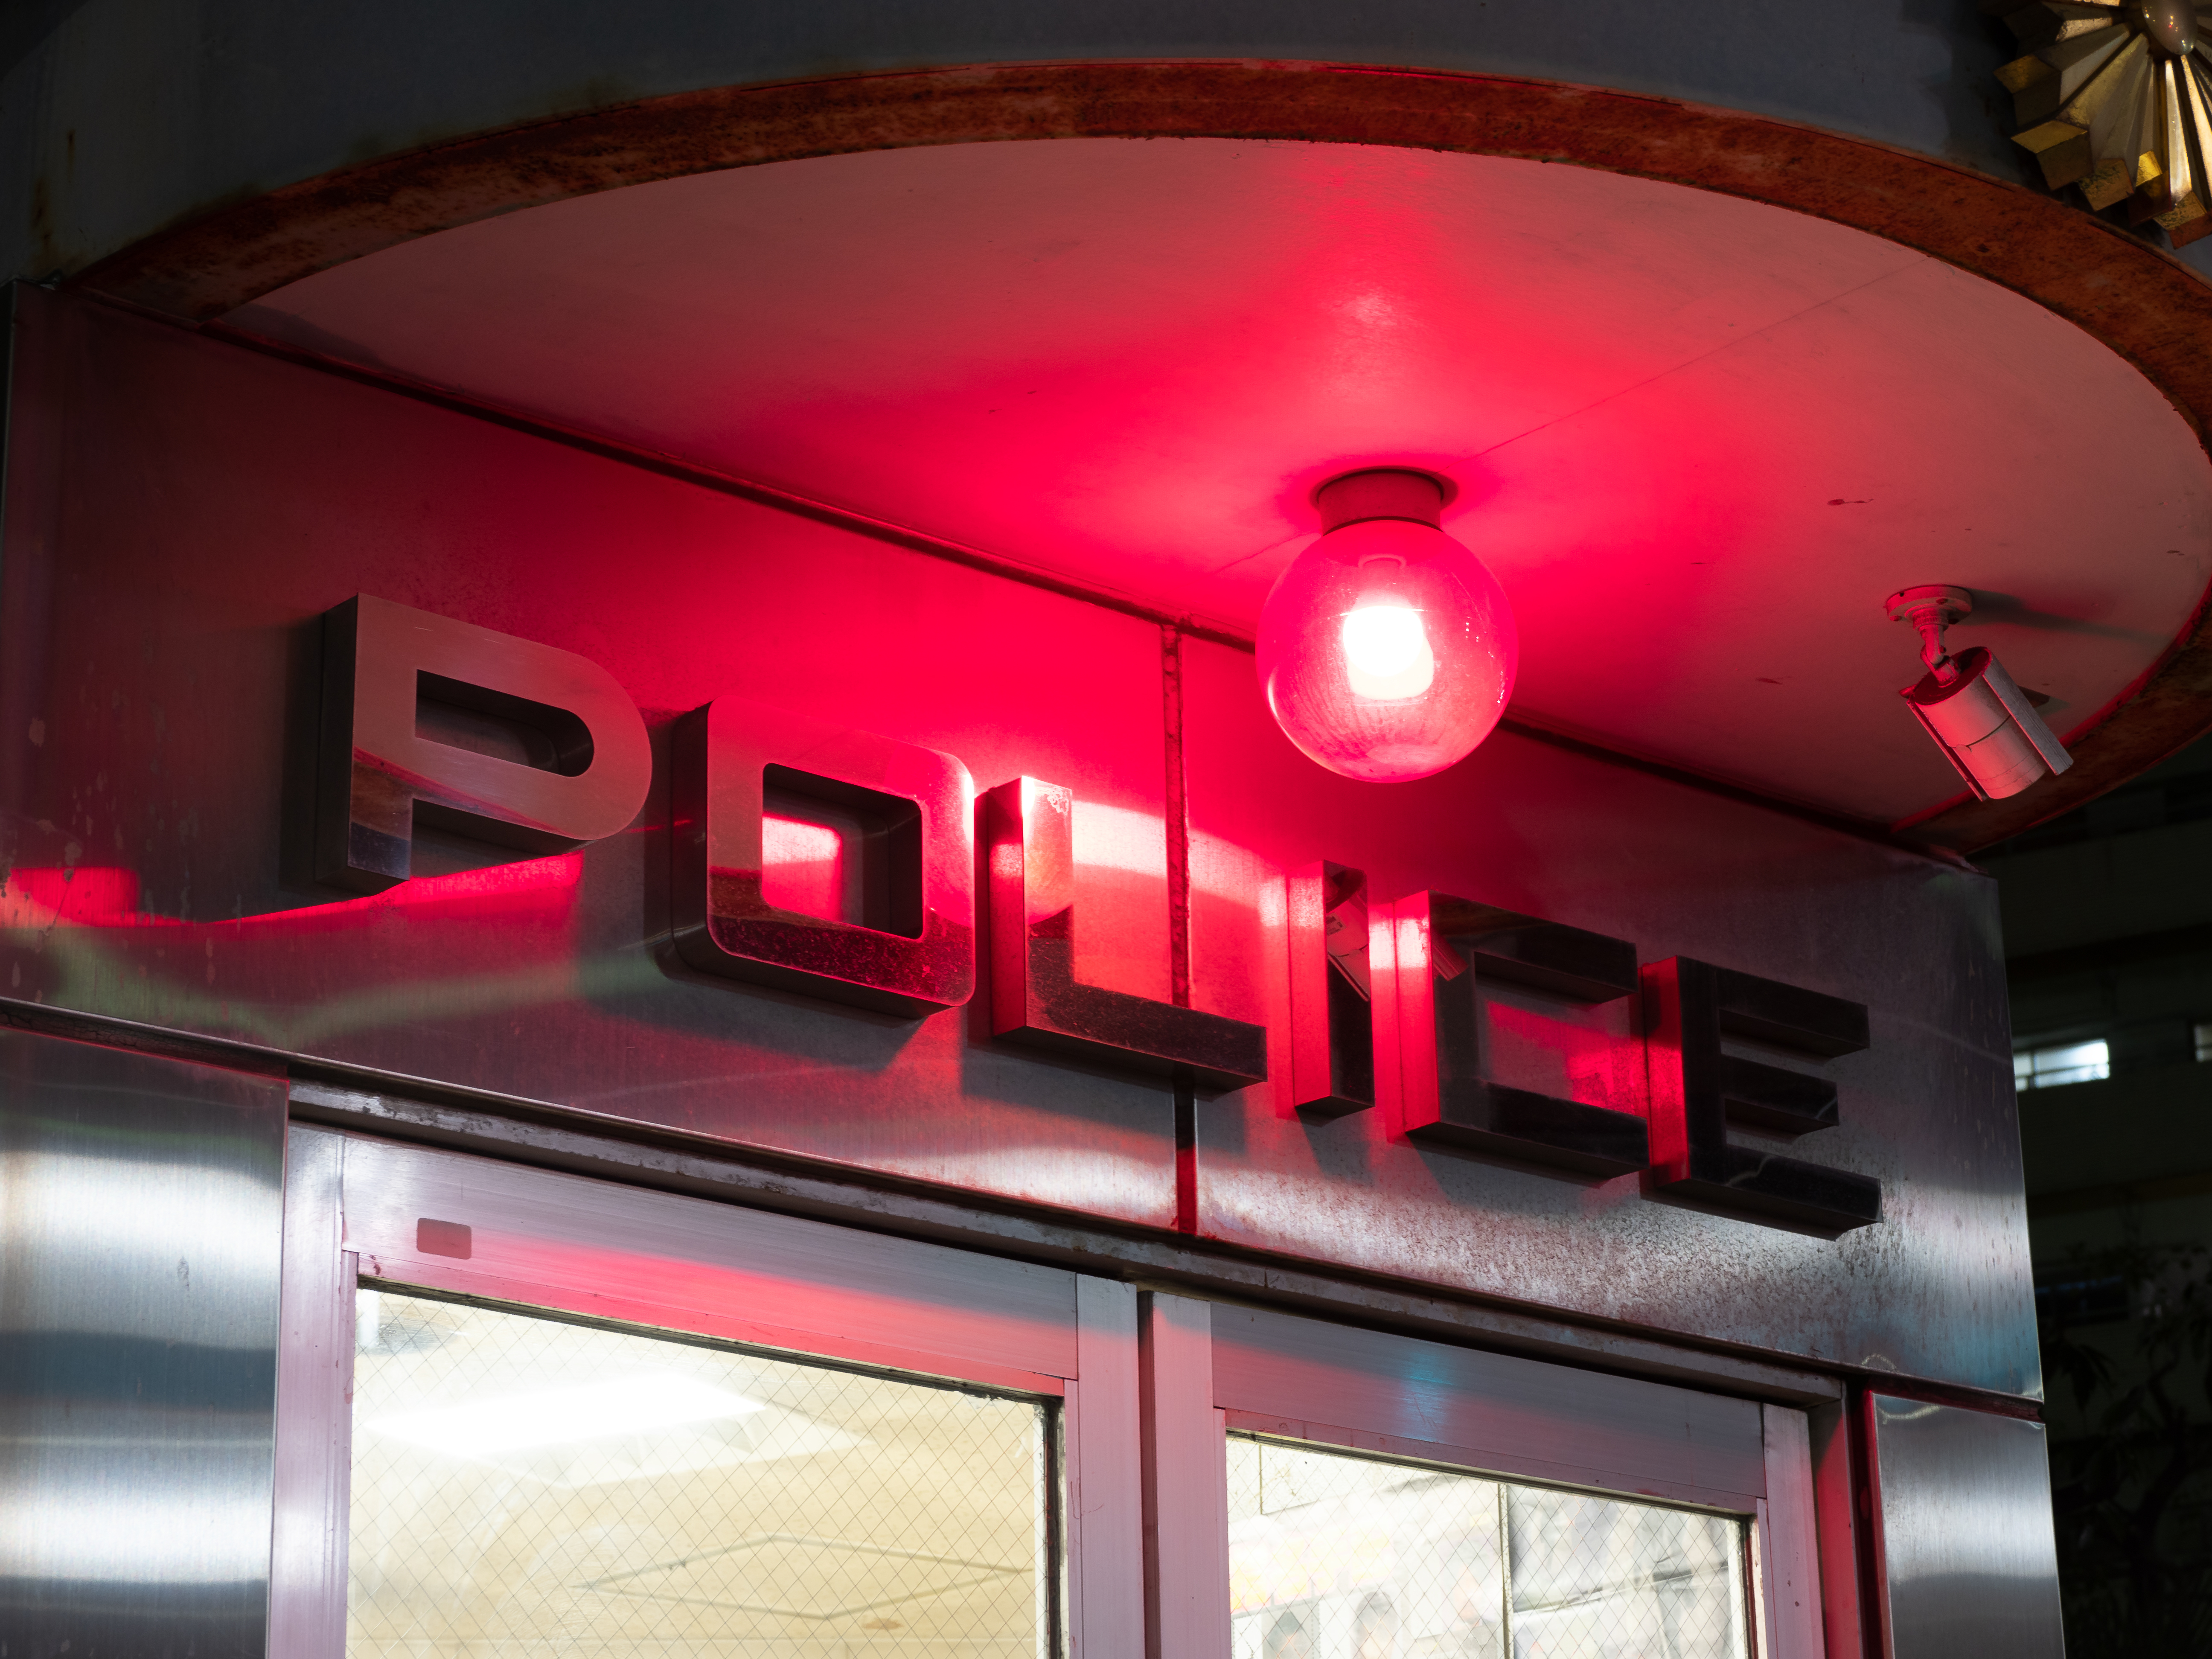 Night police box red lamp | Source: Shutterstock